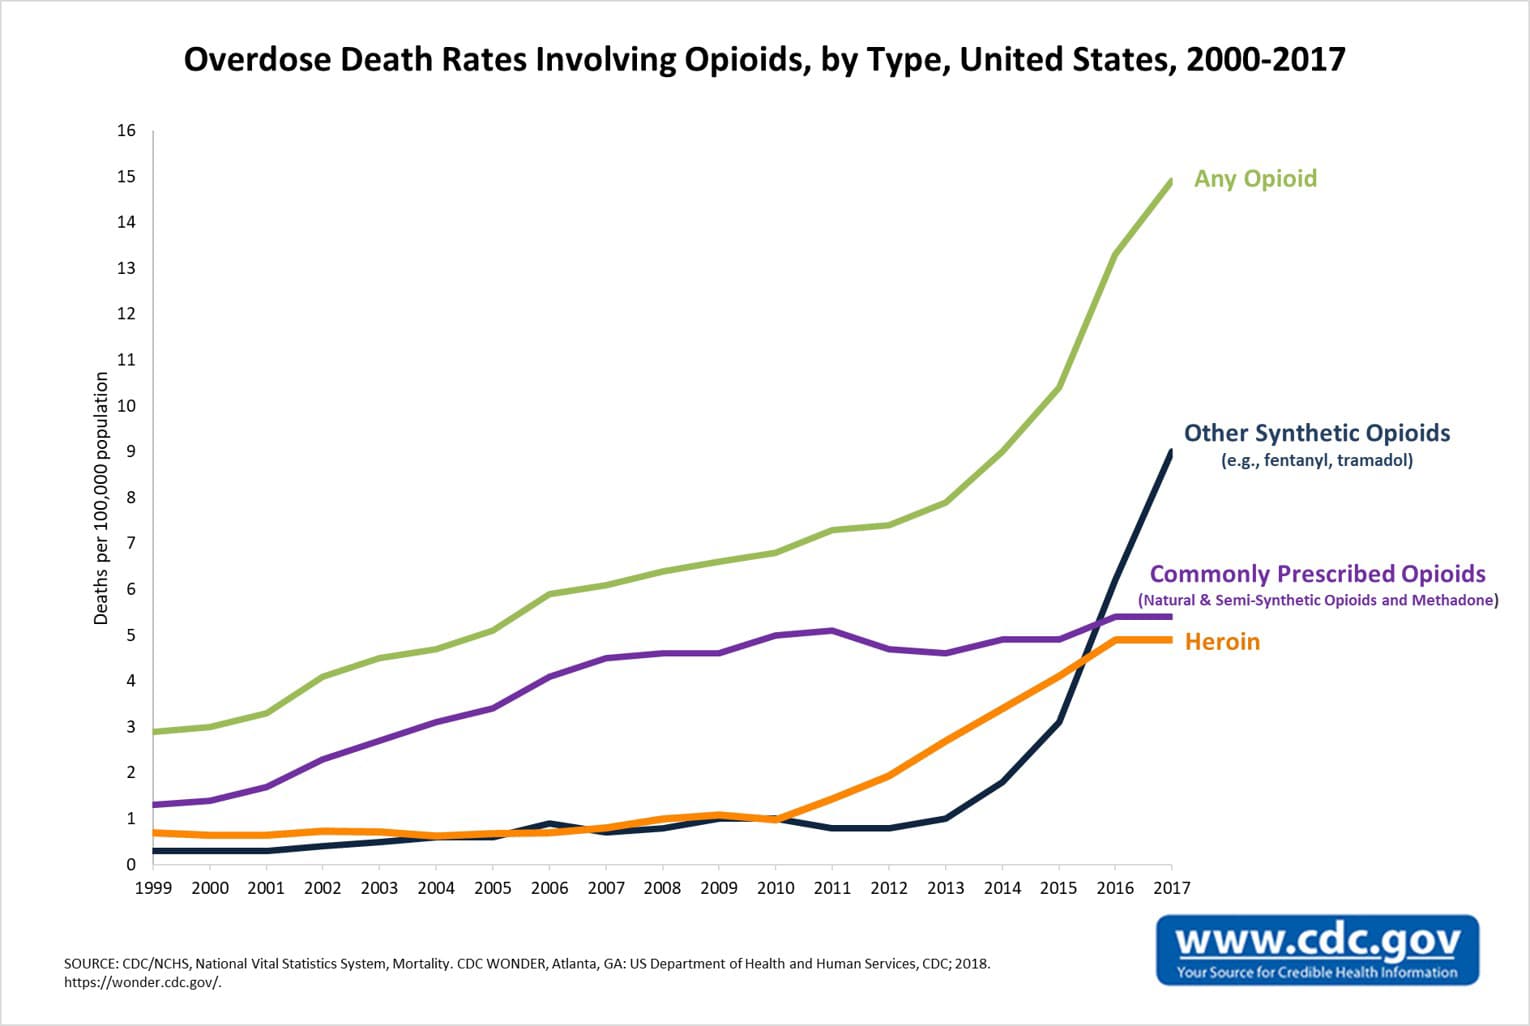 Overdose Deaths Involving Opioids, by Type of Oioid, United States, 2000-2016